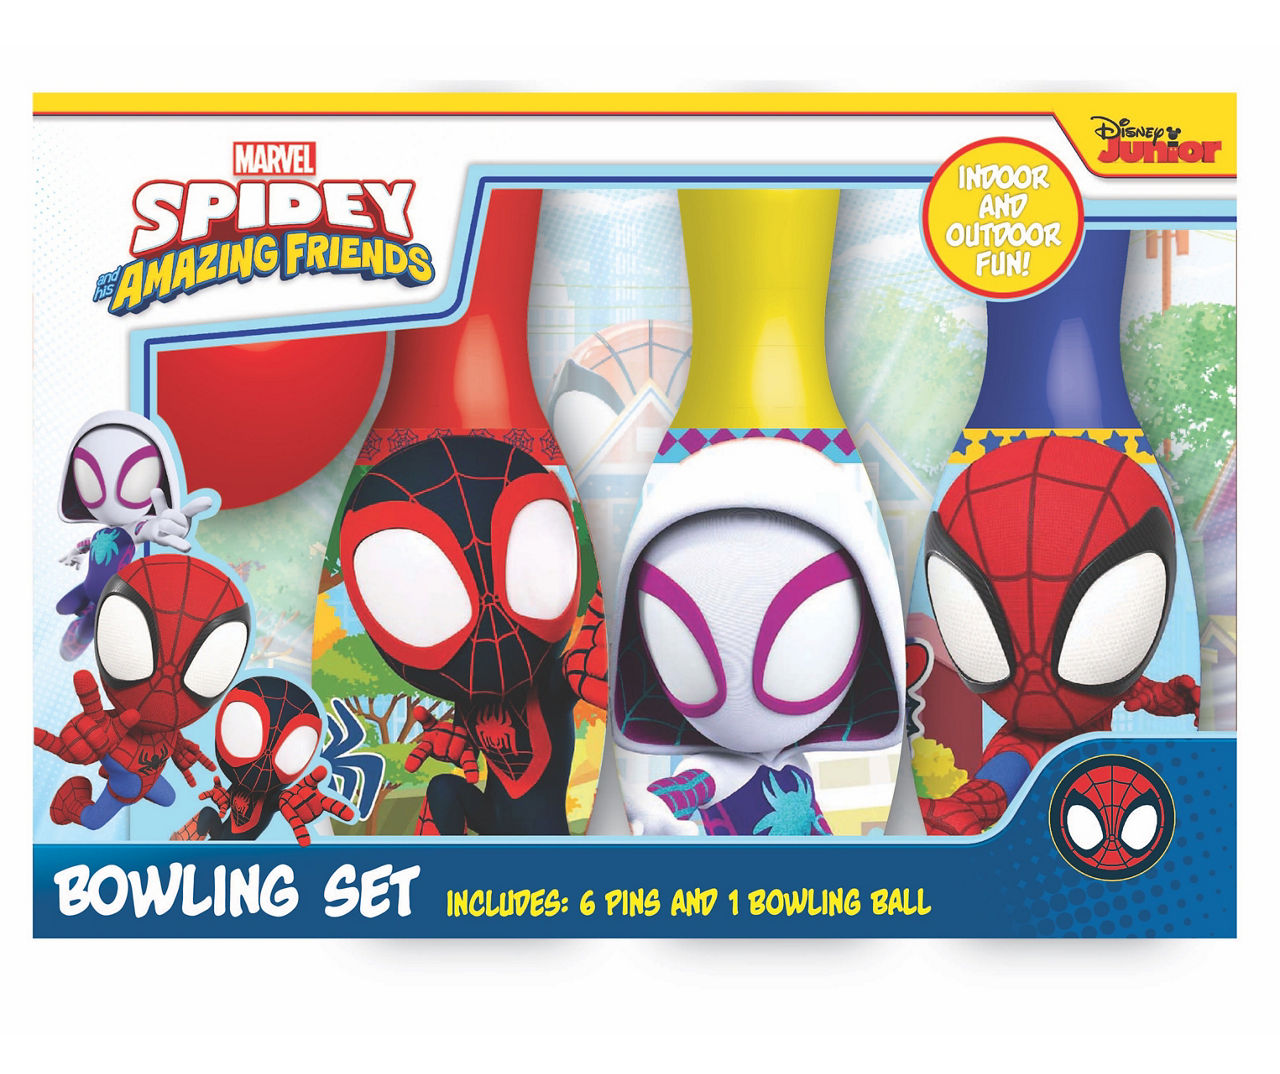  Spiderman Bowling Games Activities Bundle for Toddlers, Kids -  3 Pc Marvel Superhero Bowling Set with Stickers, and More (Spiderman  Playset) : Sports & Outdoors